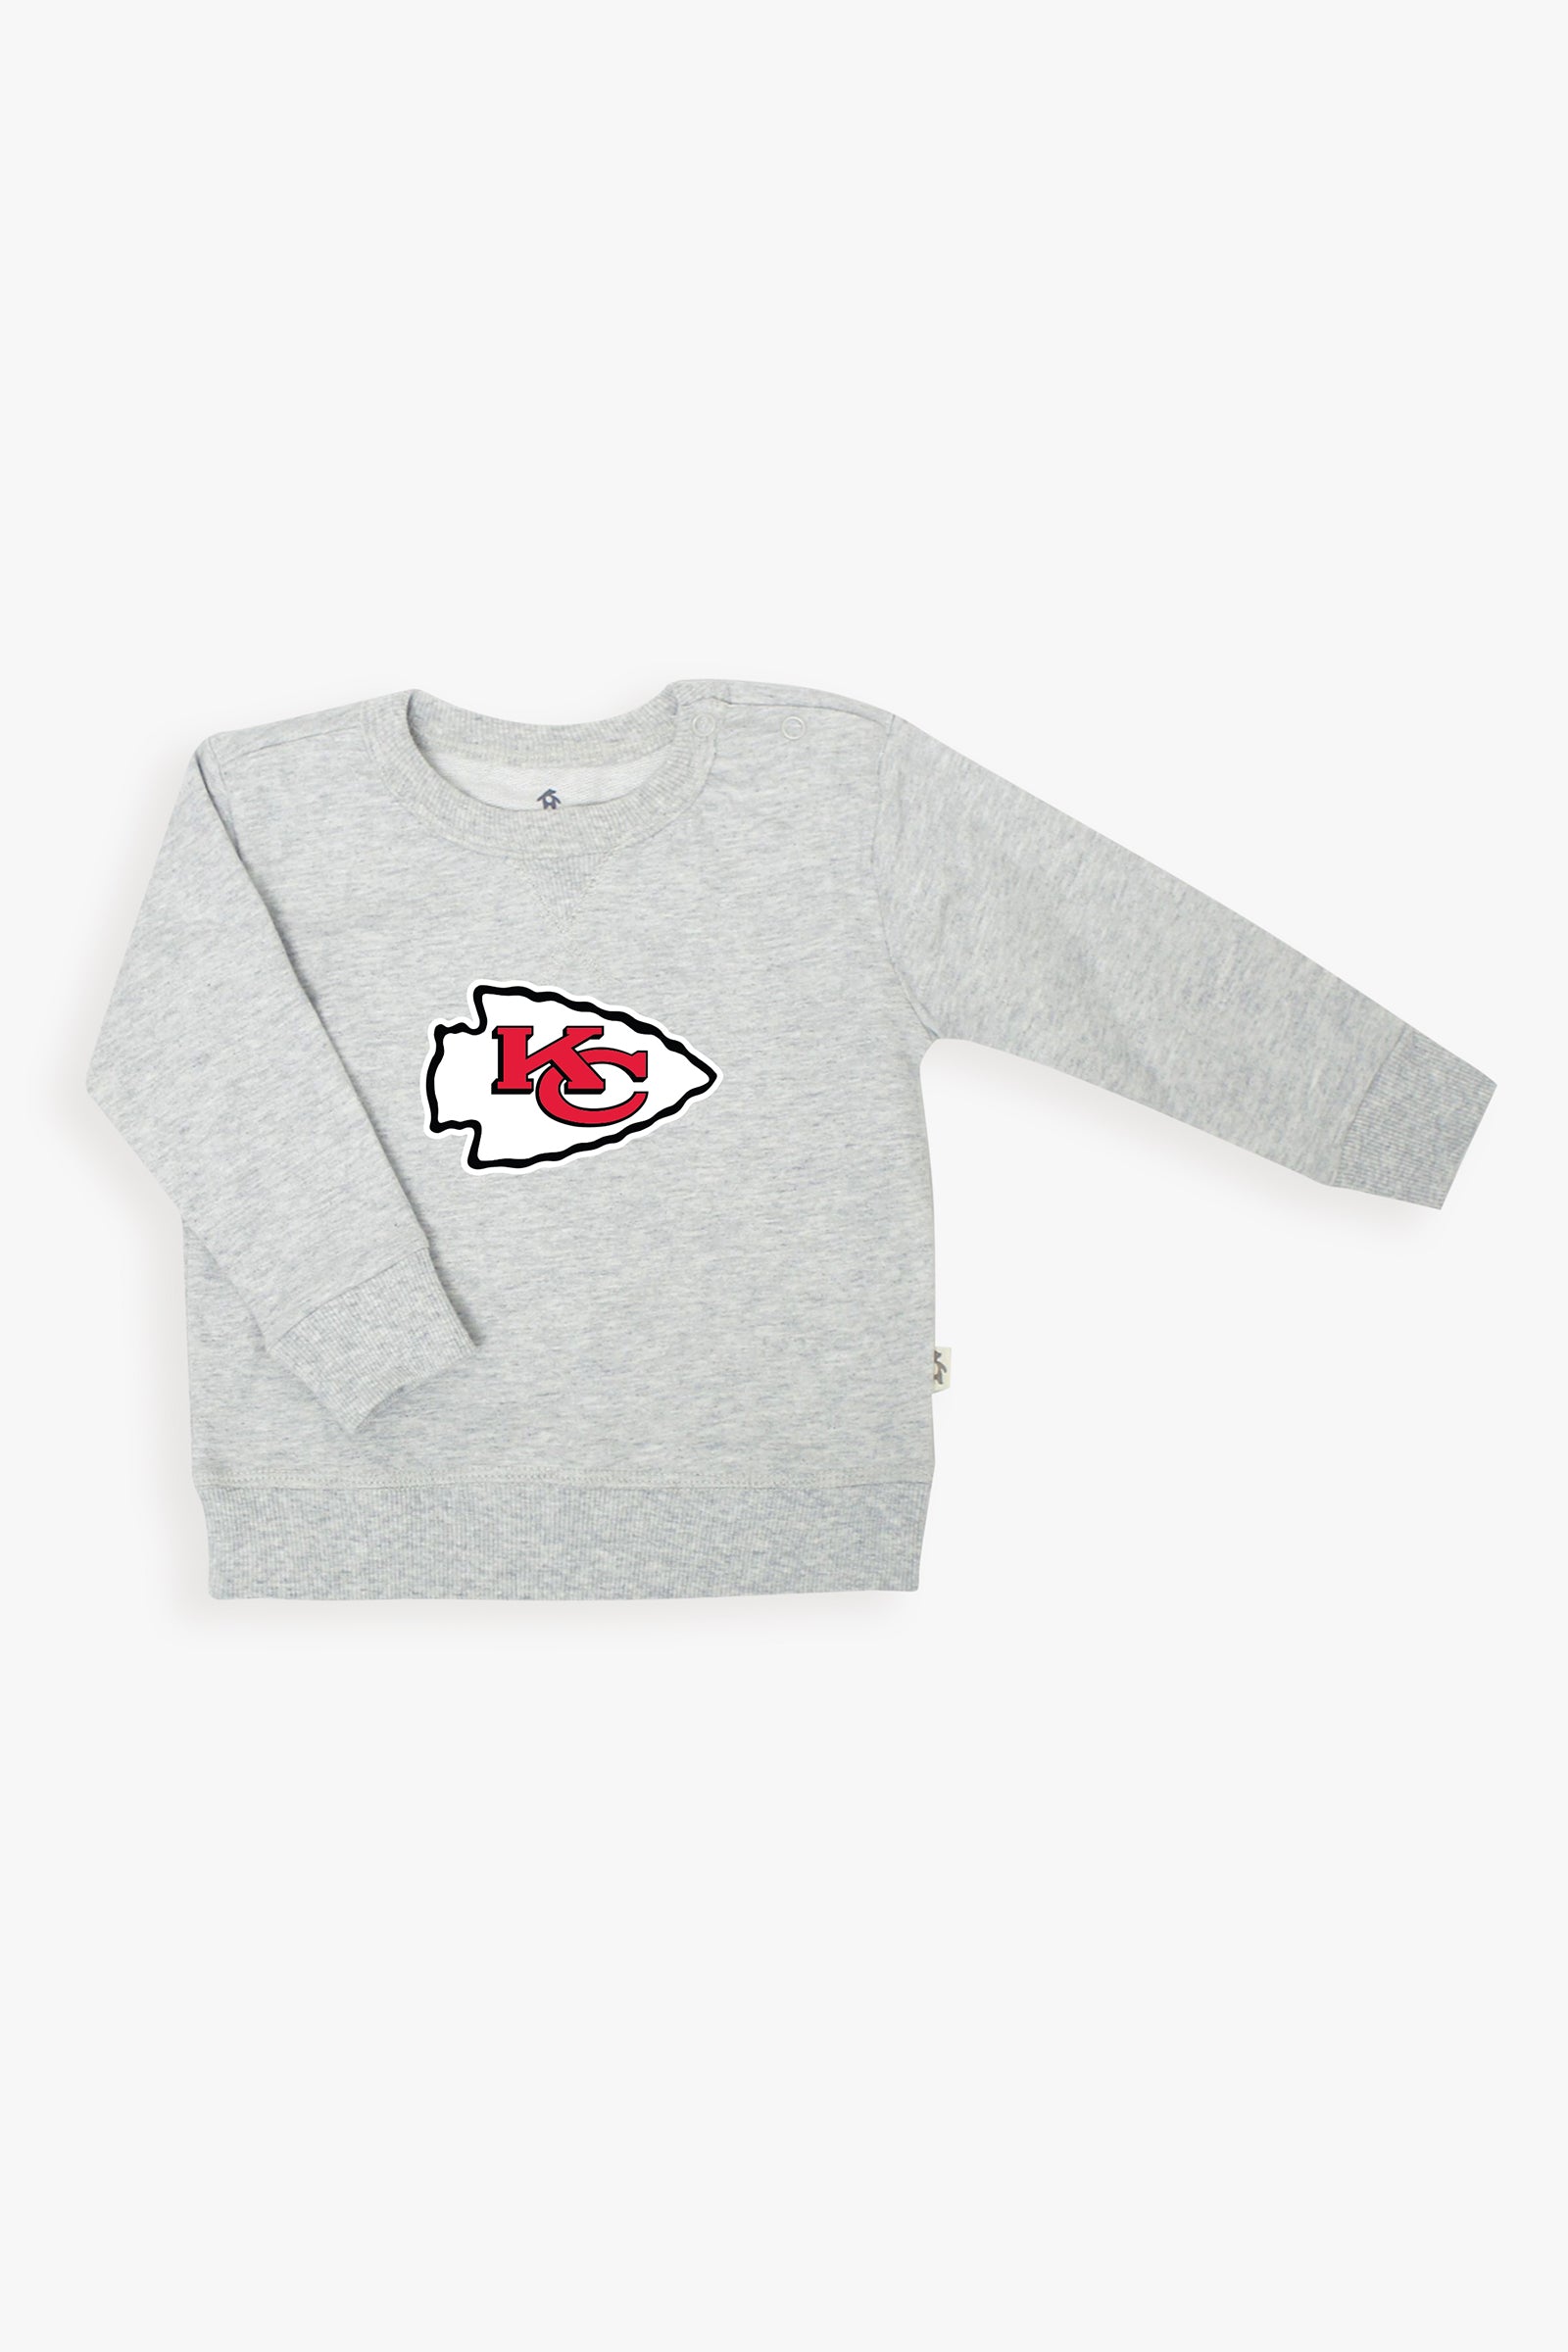 Gertex NFL Toddler French Terry Crewneck Sweater in Grey